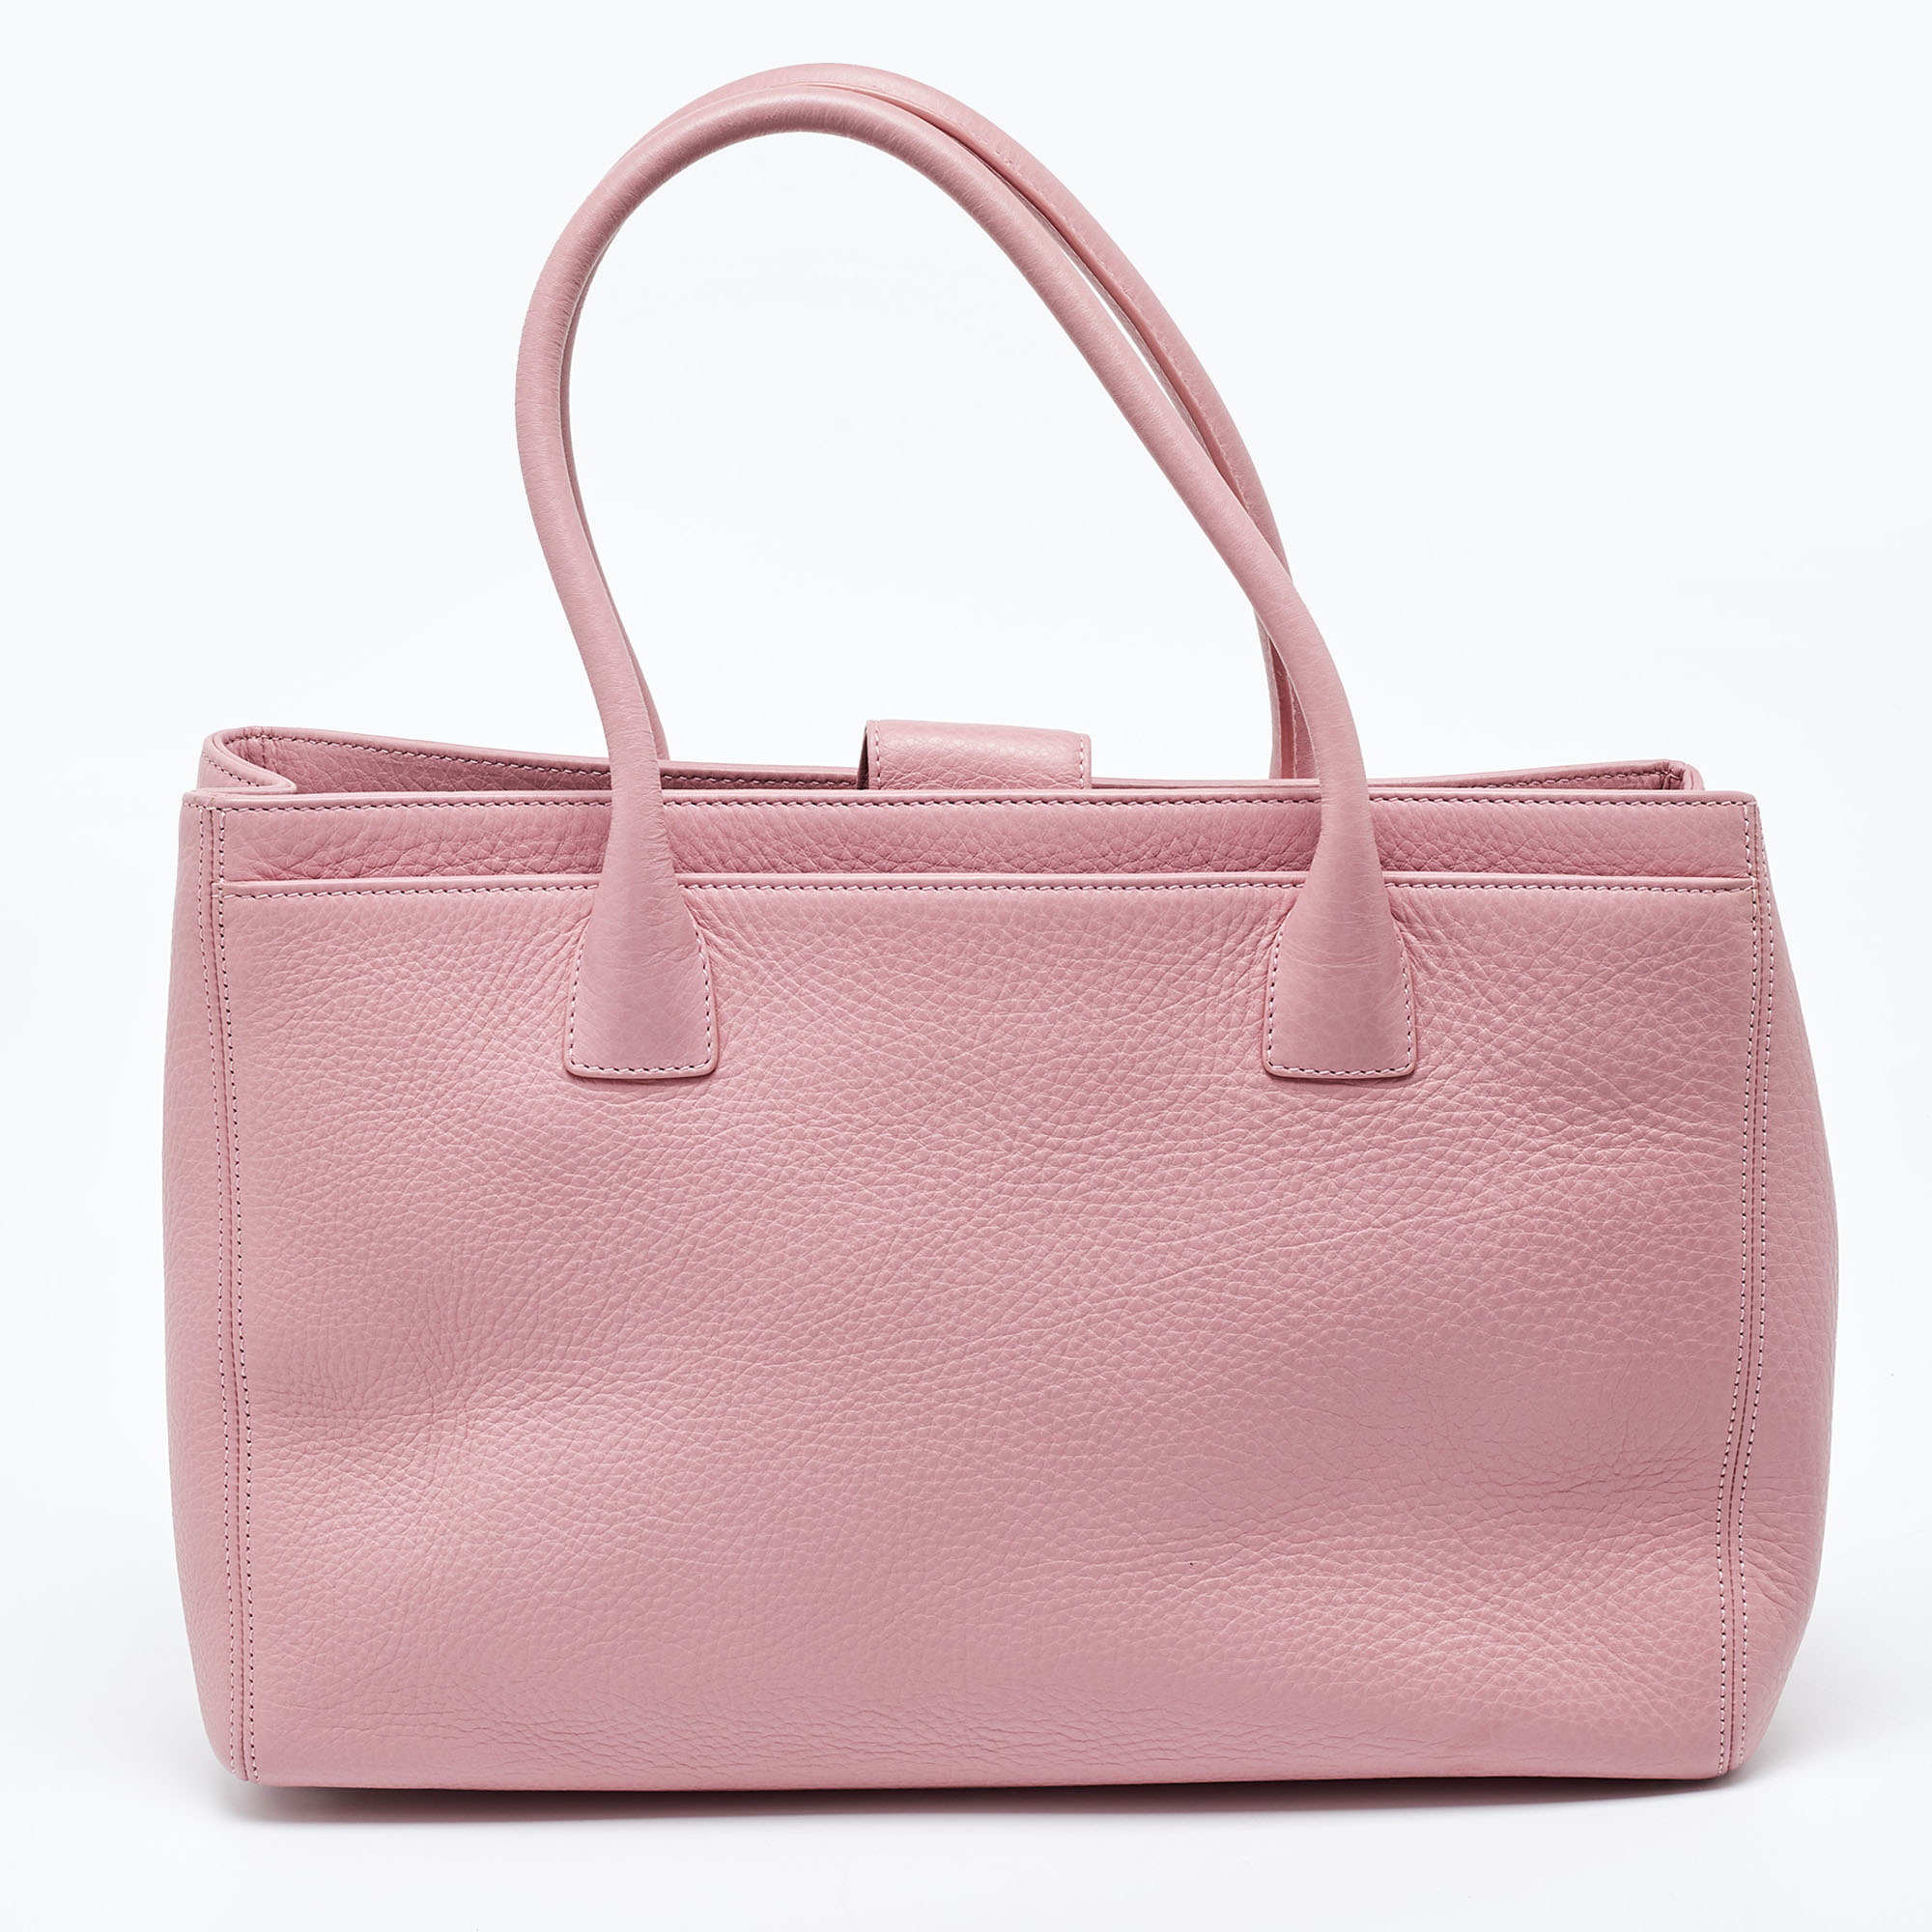 Chanel Pink Leather Executive Cerf Tote